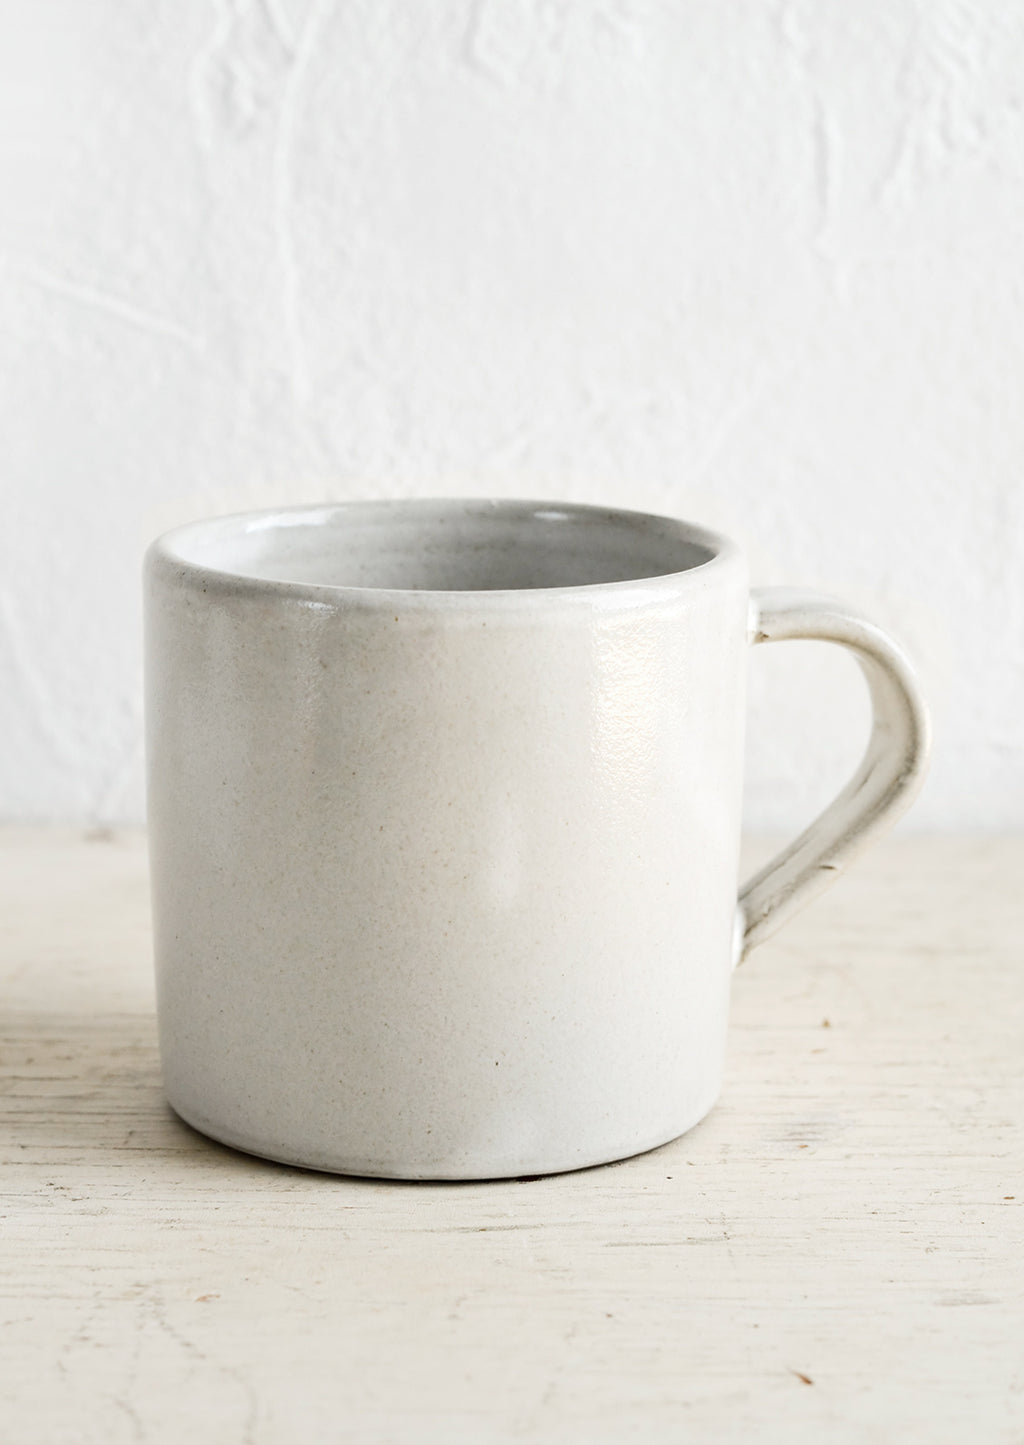 1: A ceramic coffee mug in a simple, classic shape in a white glaze over brown clay.